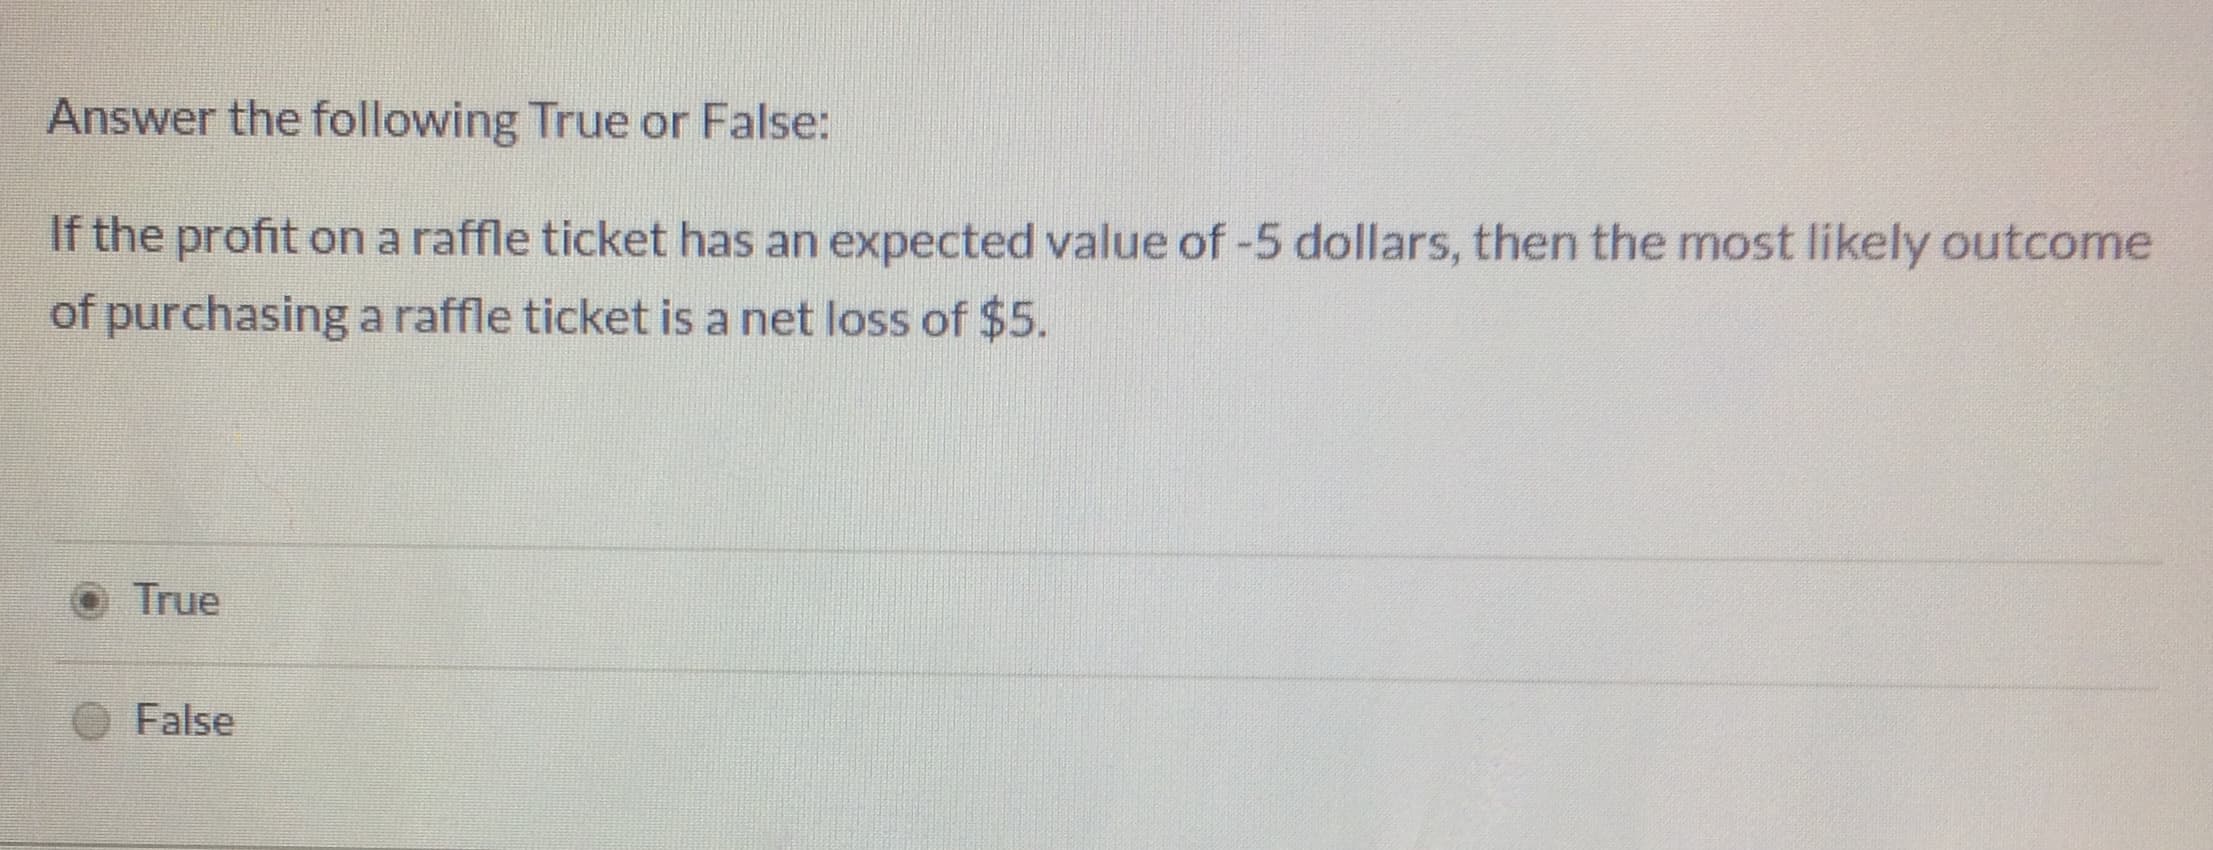 Answer the following True or False:
If the profit on a raffle ticket has an expected value of -5 dollars, then the most likely outcome
of purchasing a raffle ticket is a net loss of $5.
True
False
